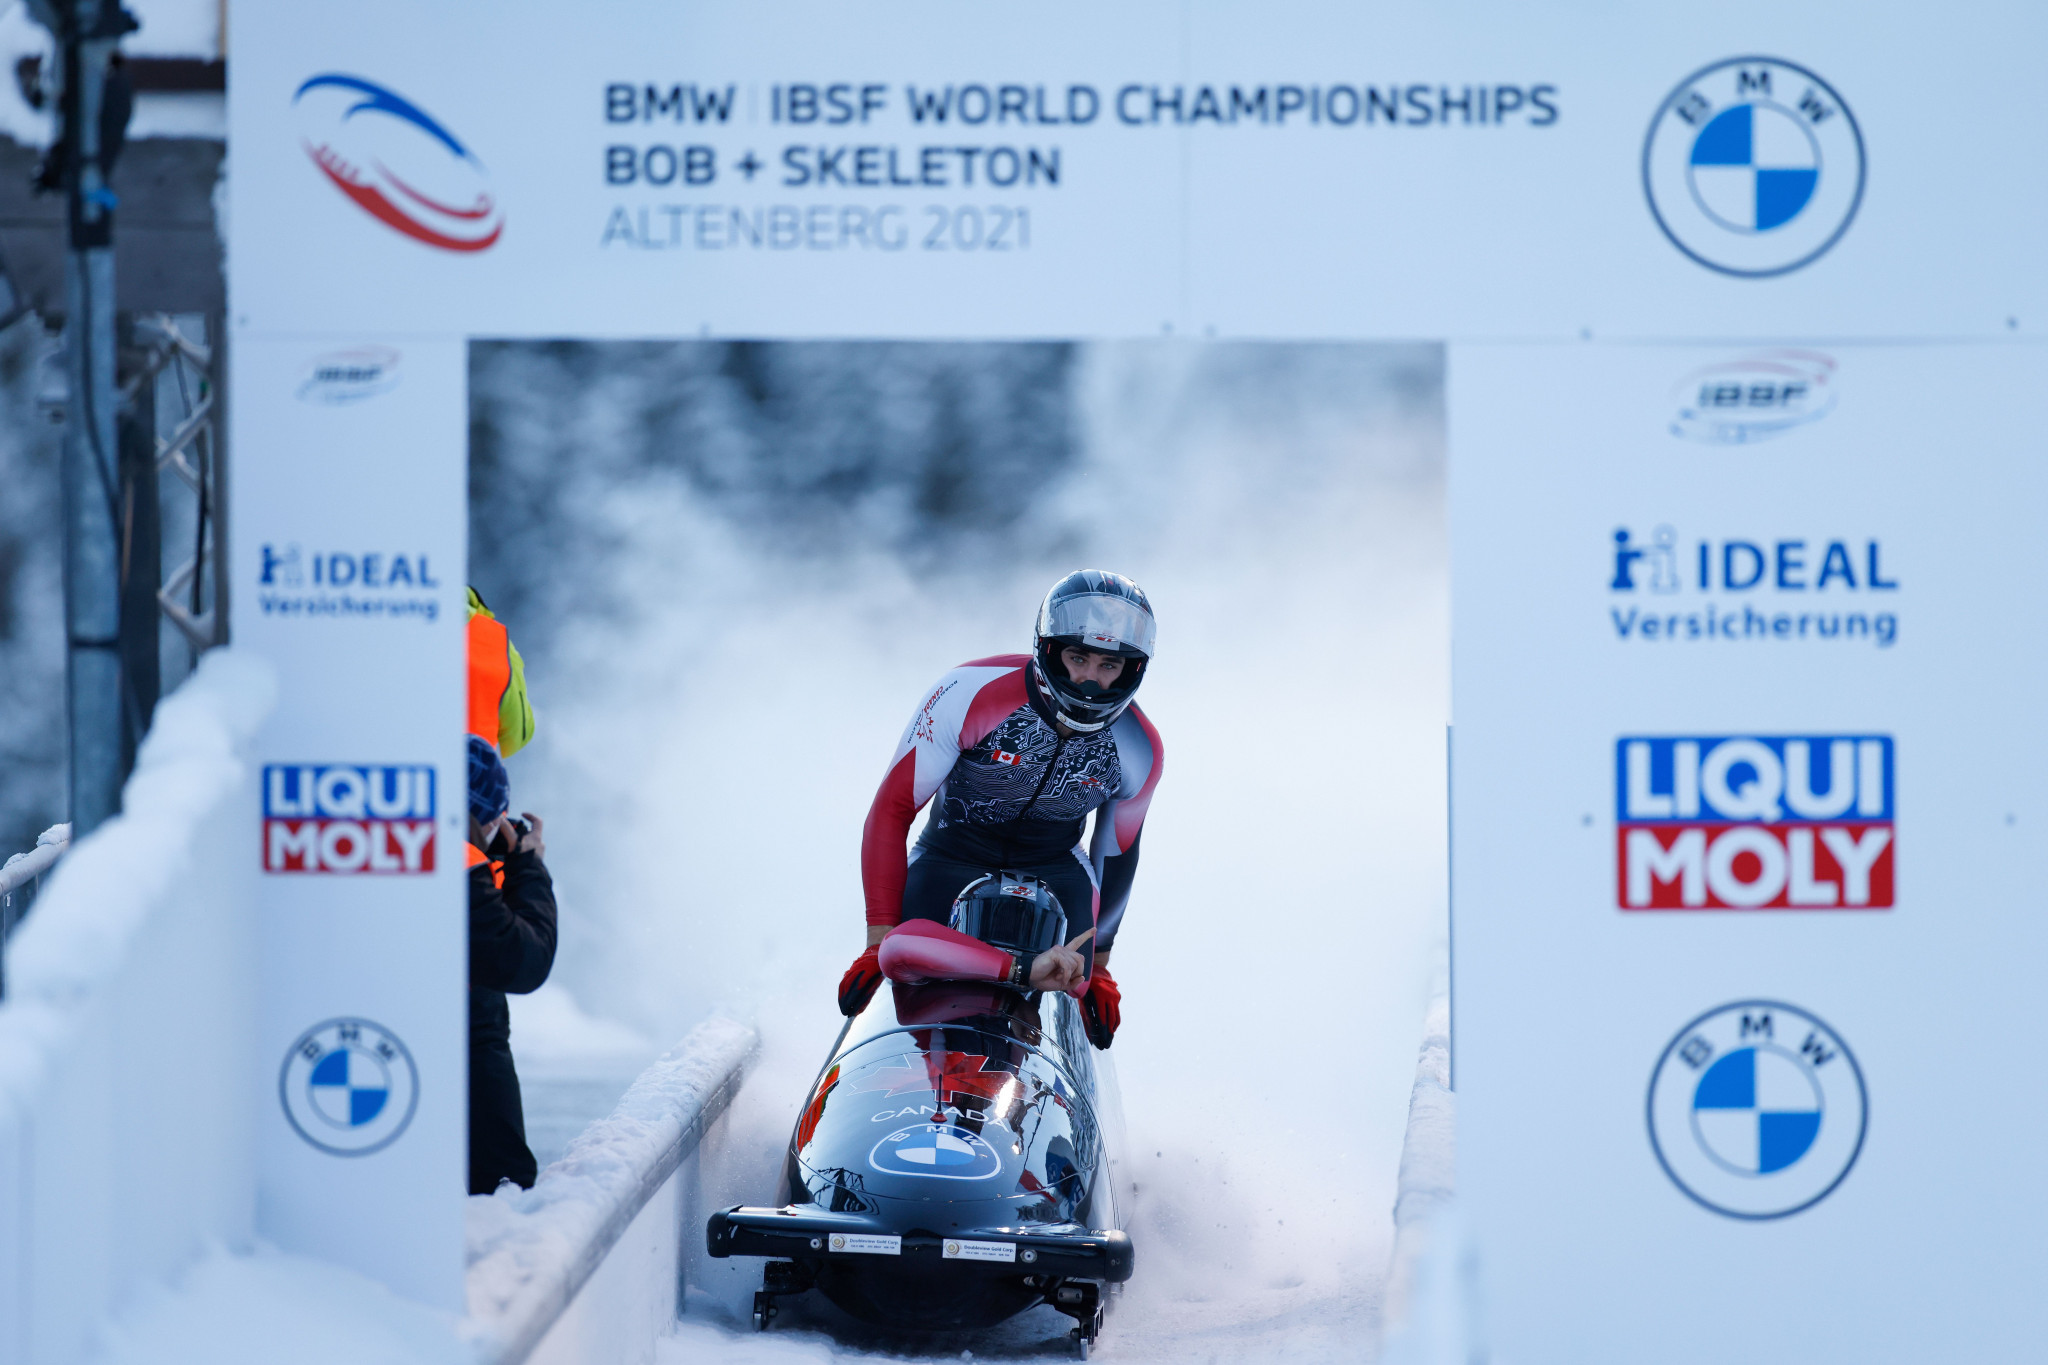 Altenberg held the 2021 IBSF World Championships ©Getty Images